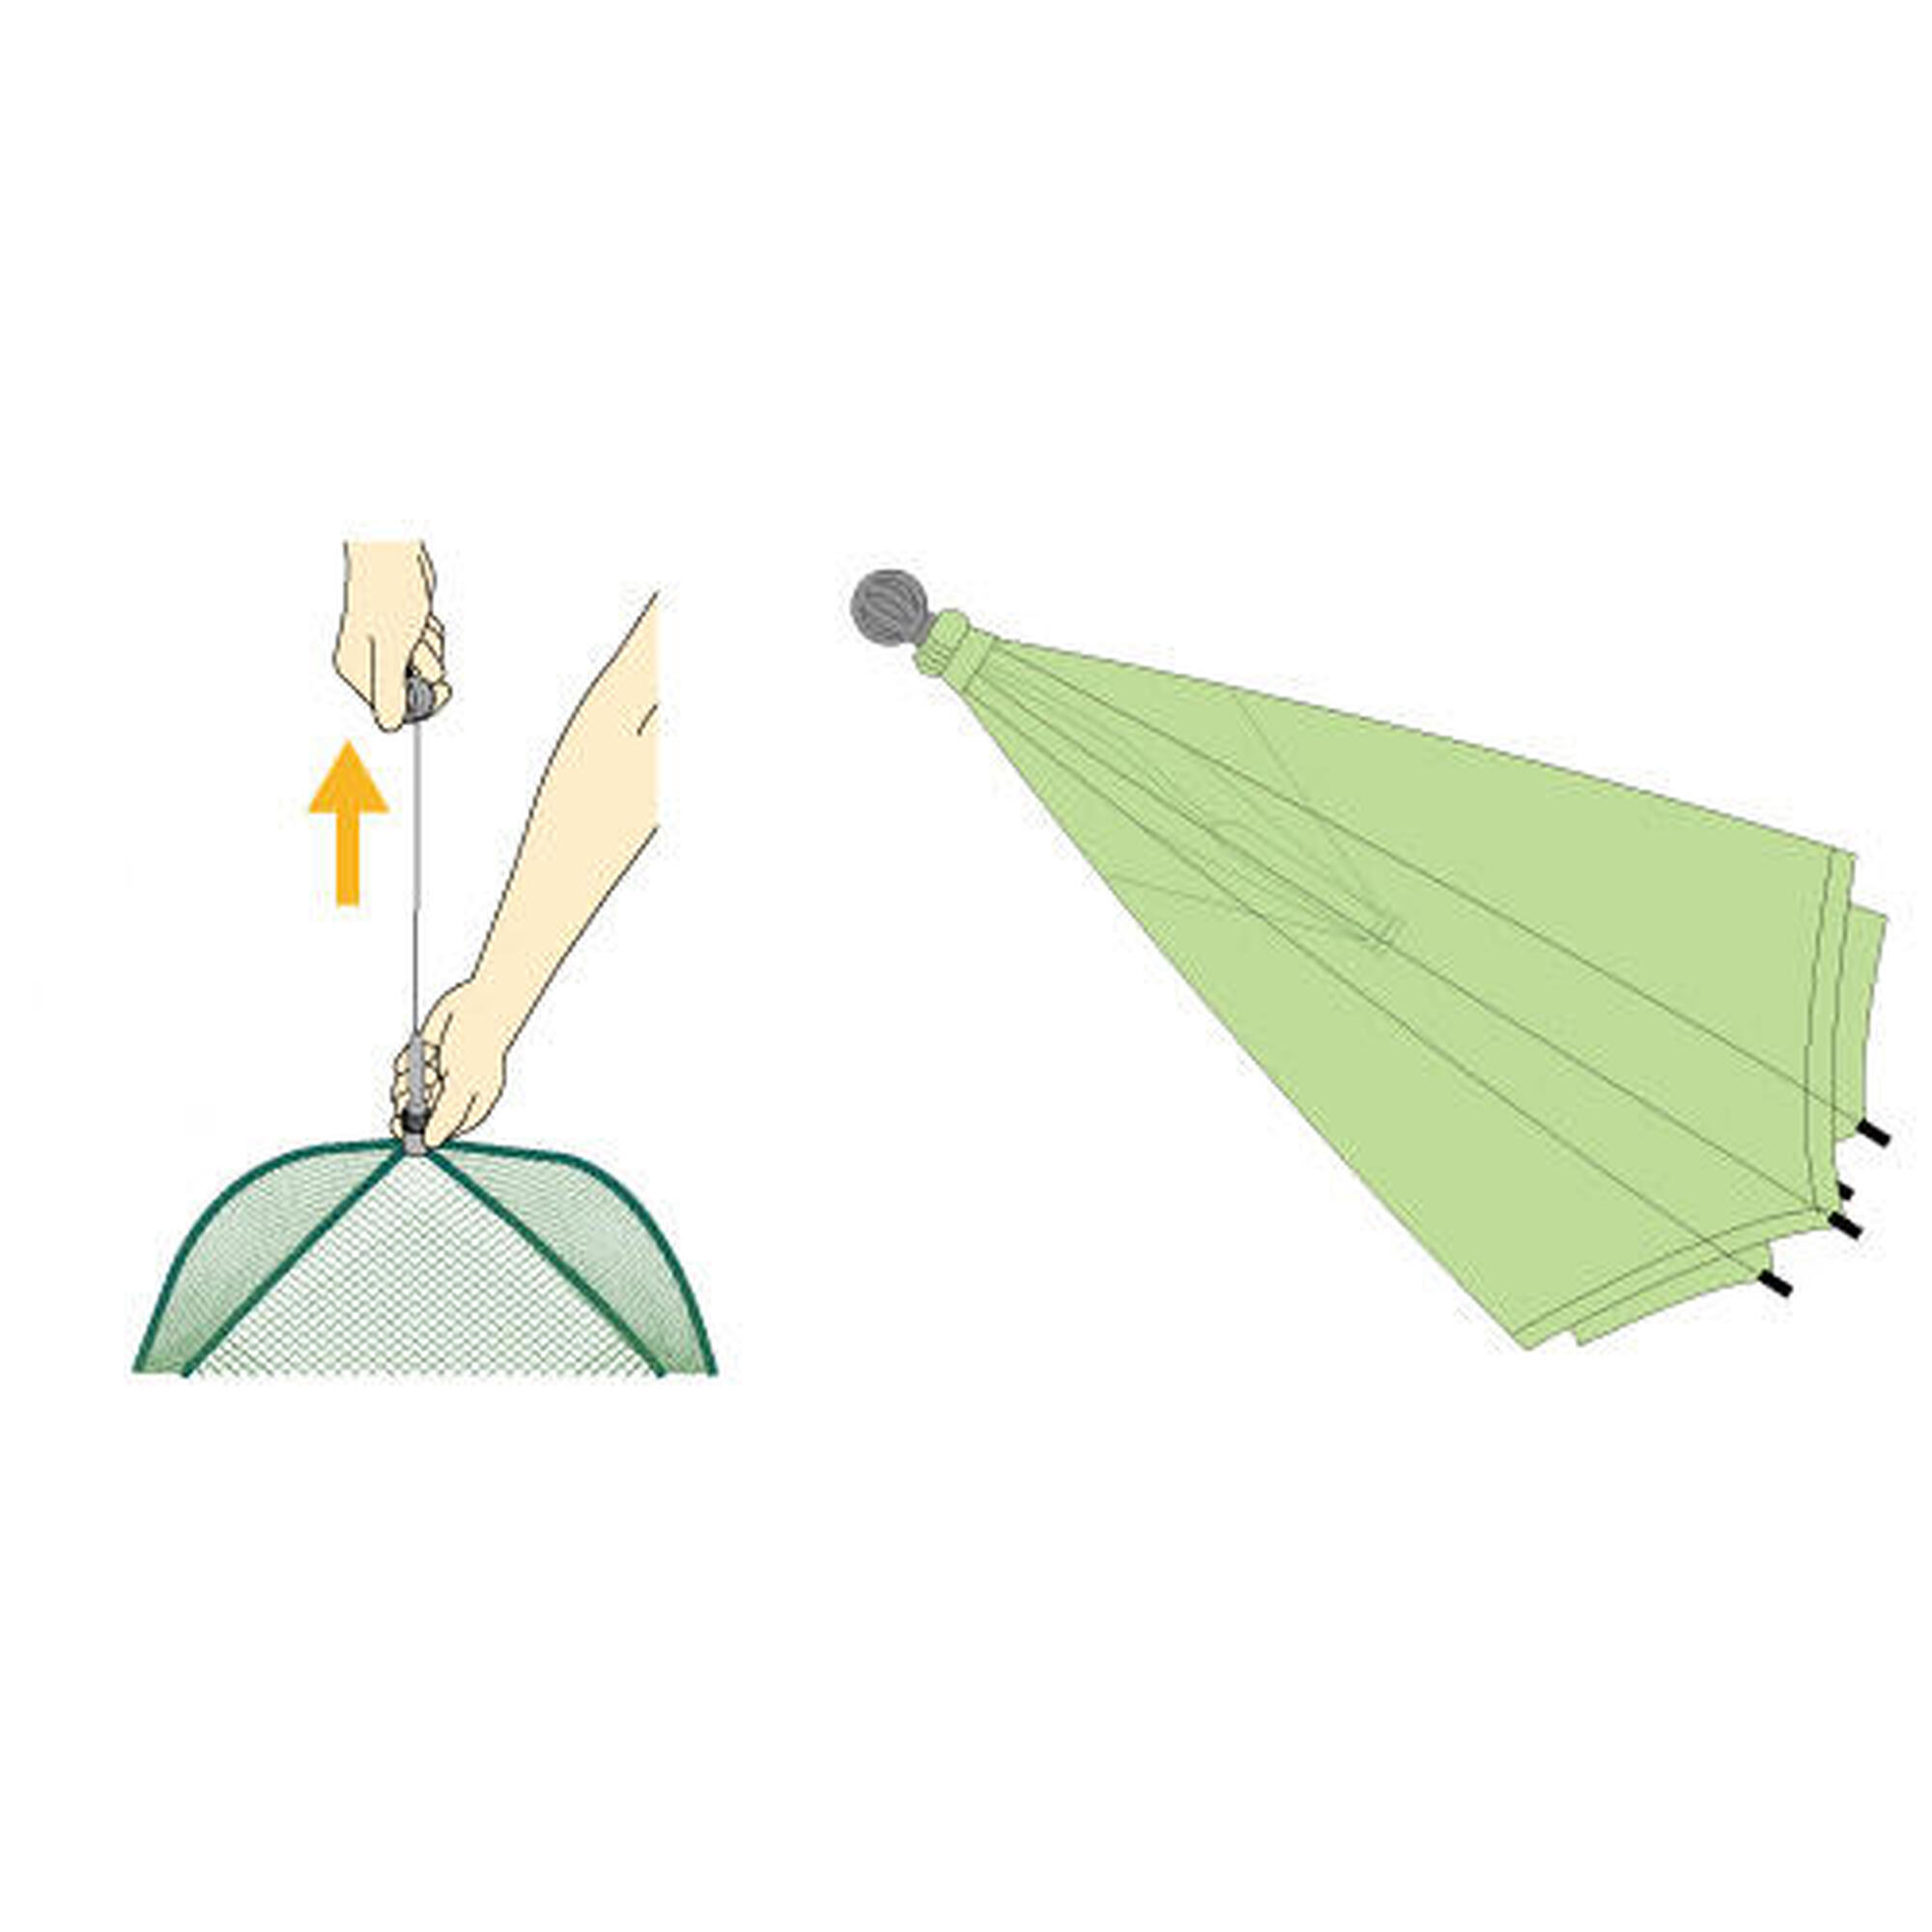 GV0881 EASY ONE TOUCH SETTING APPROACH GOLF NET - GREEN